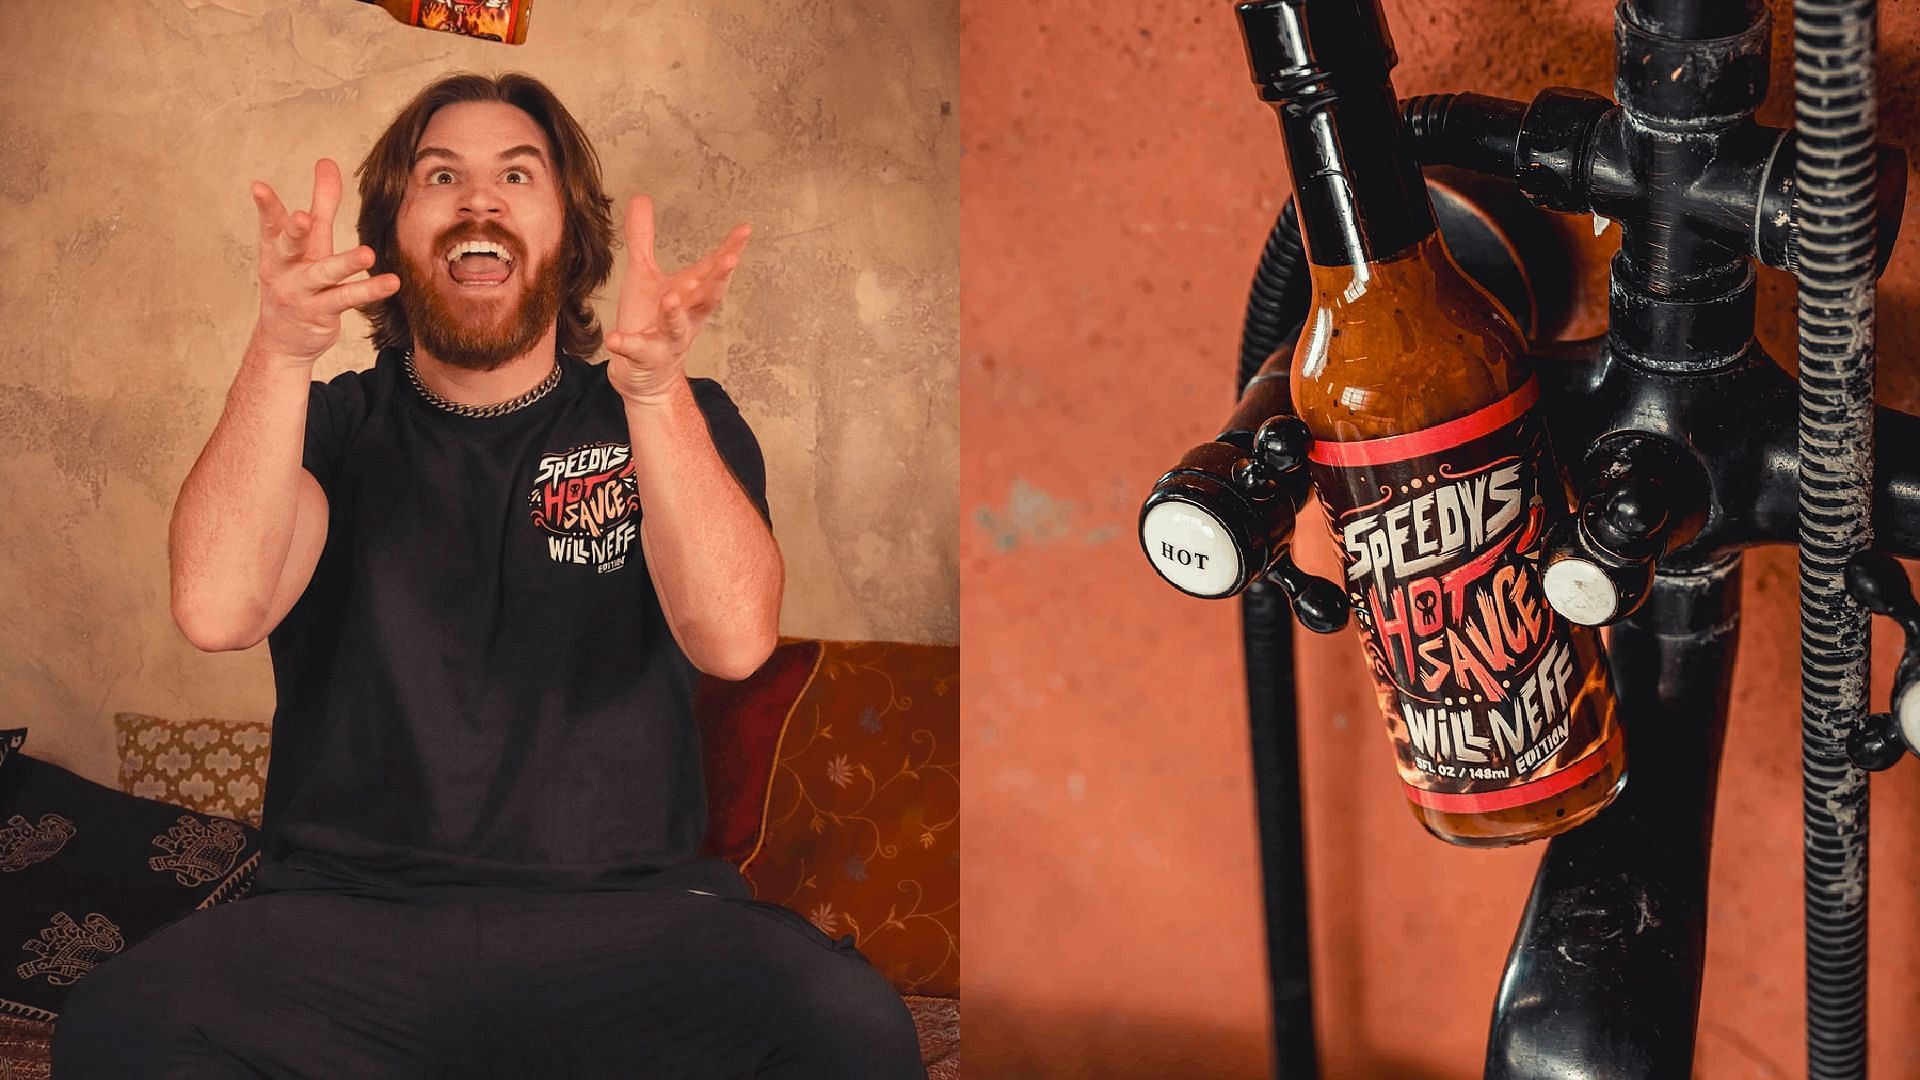 Will Neff celebrated as his hot sauce sold out in latest sale. (Image via neffsauce.com)